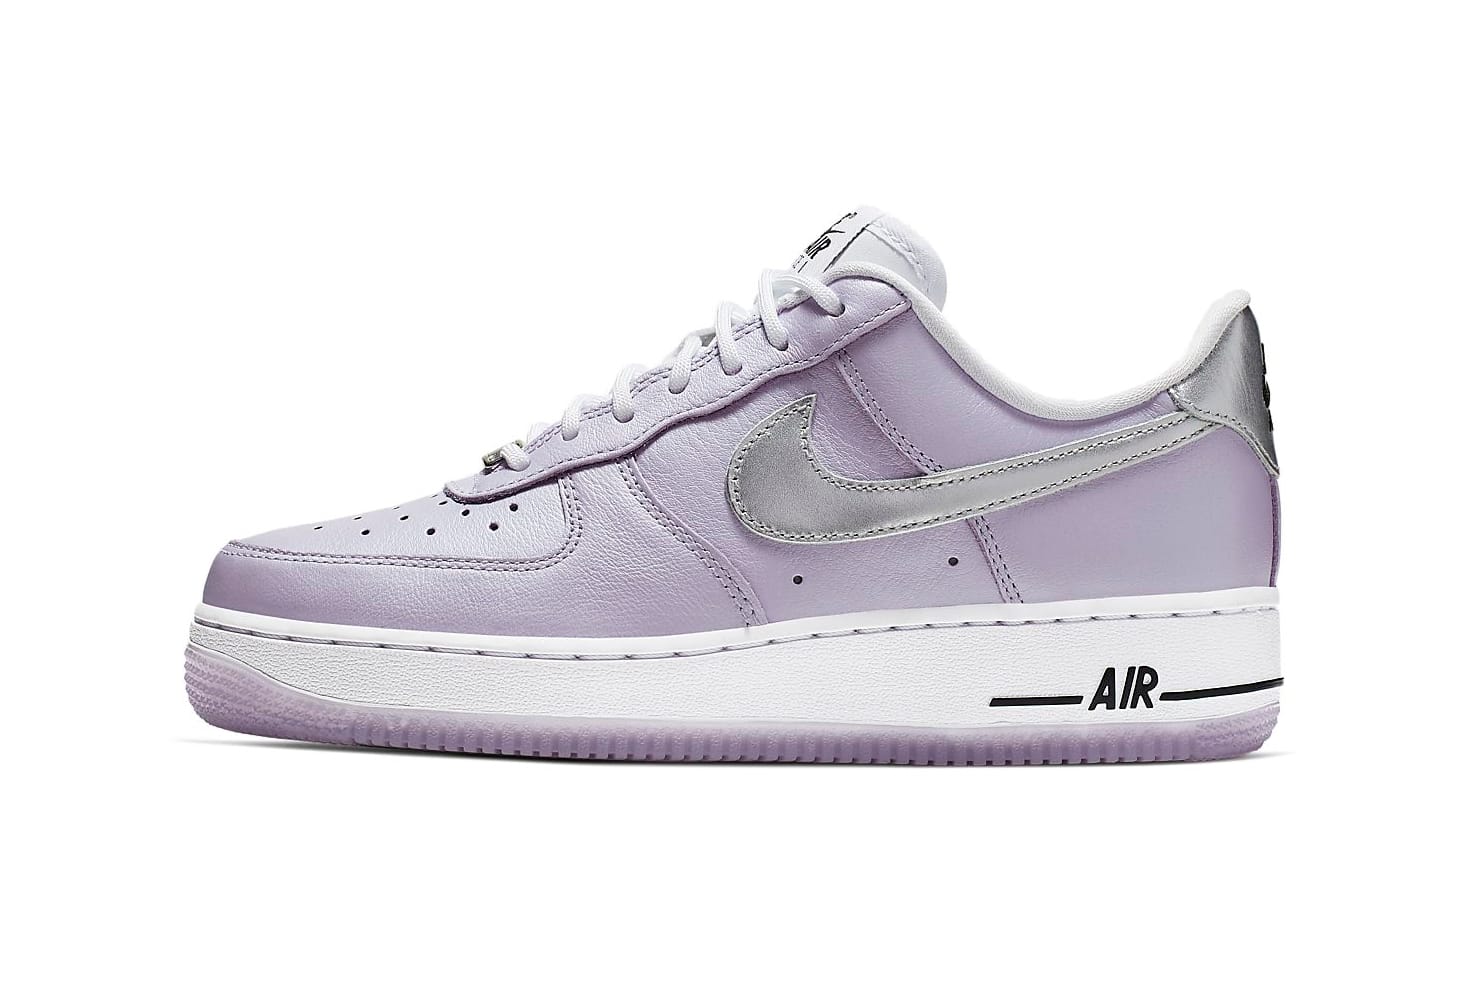 air force 1 with silver